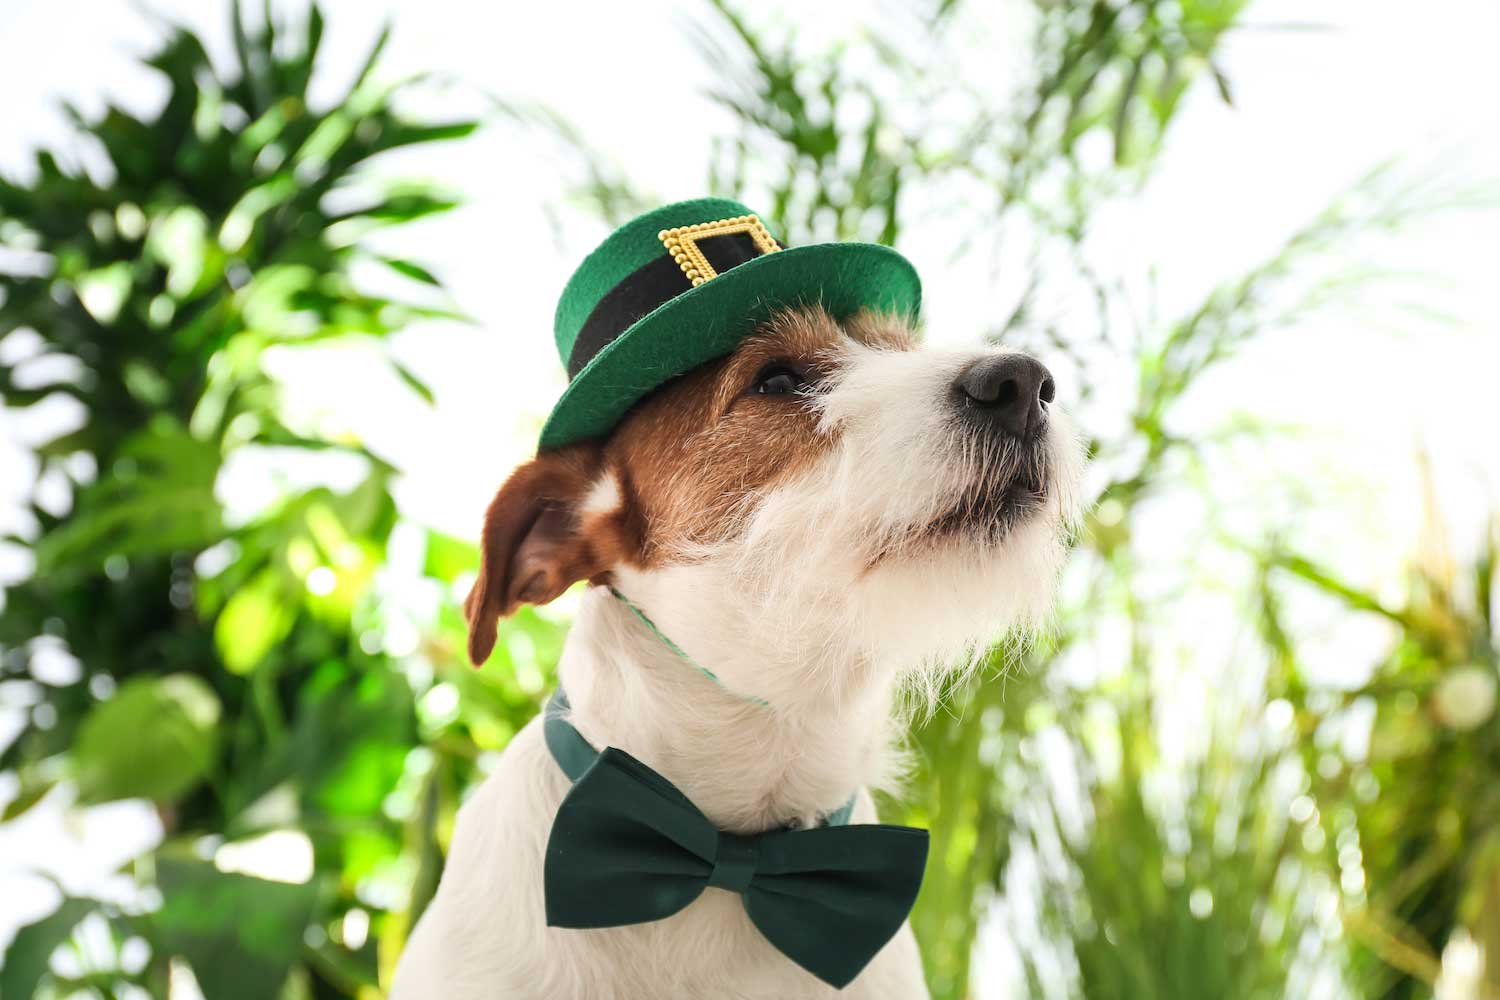 A dog wearing a green top hat and green bowtie.